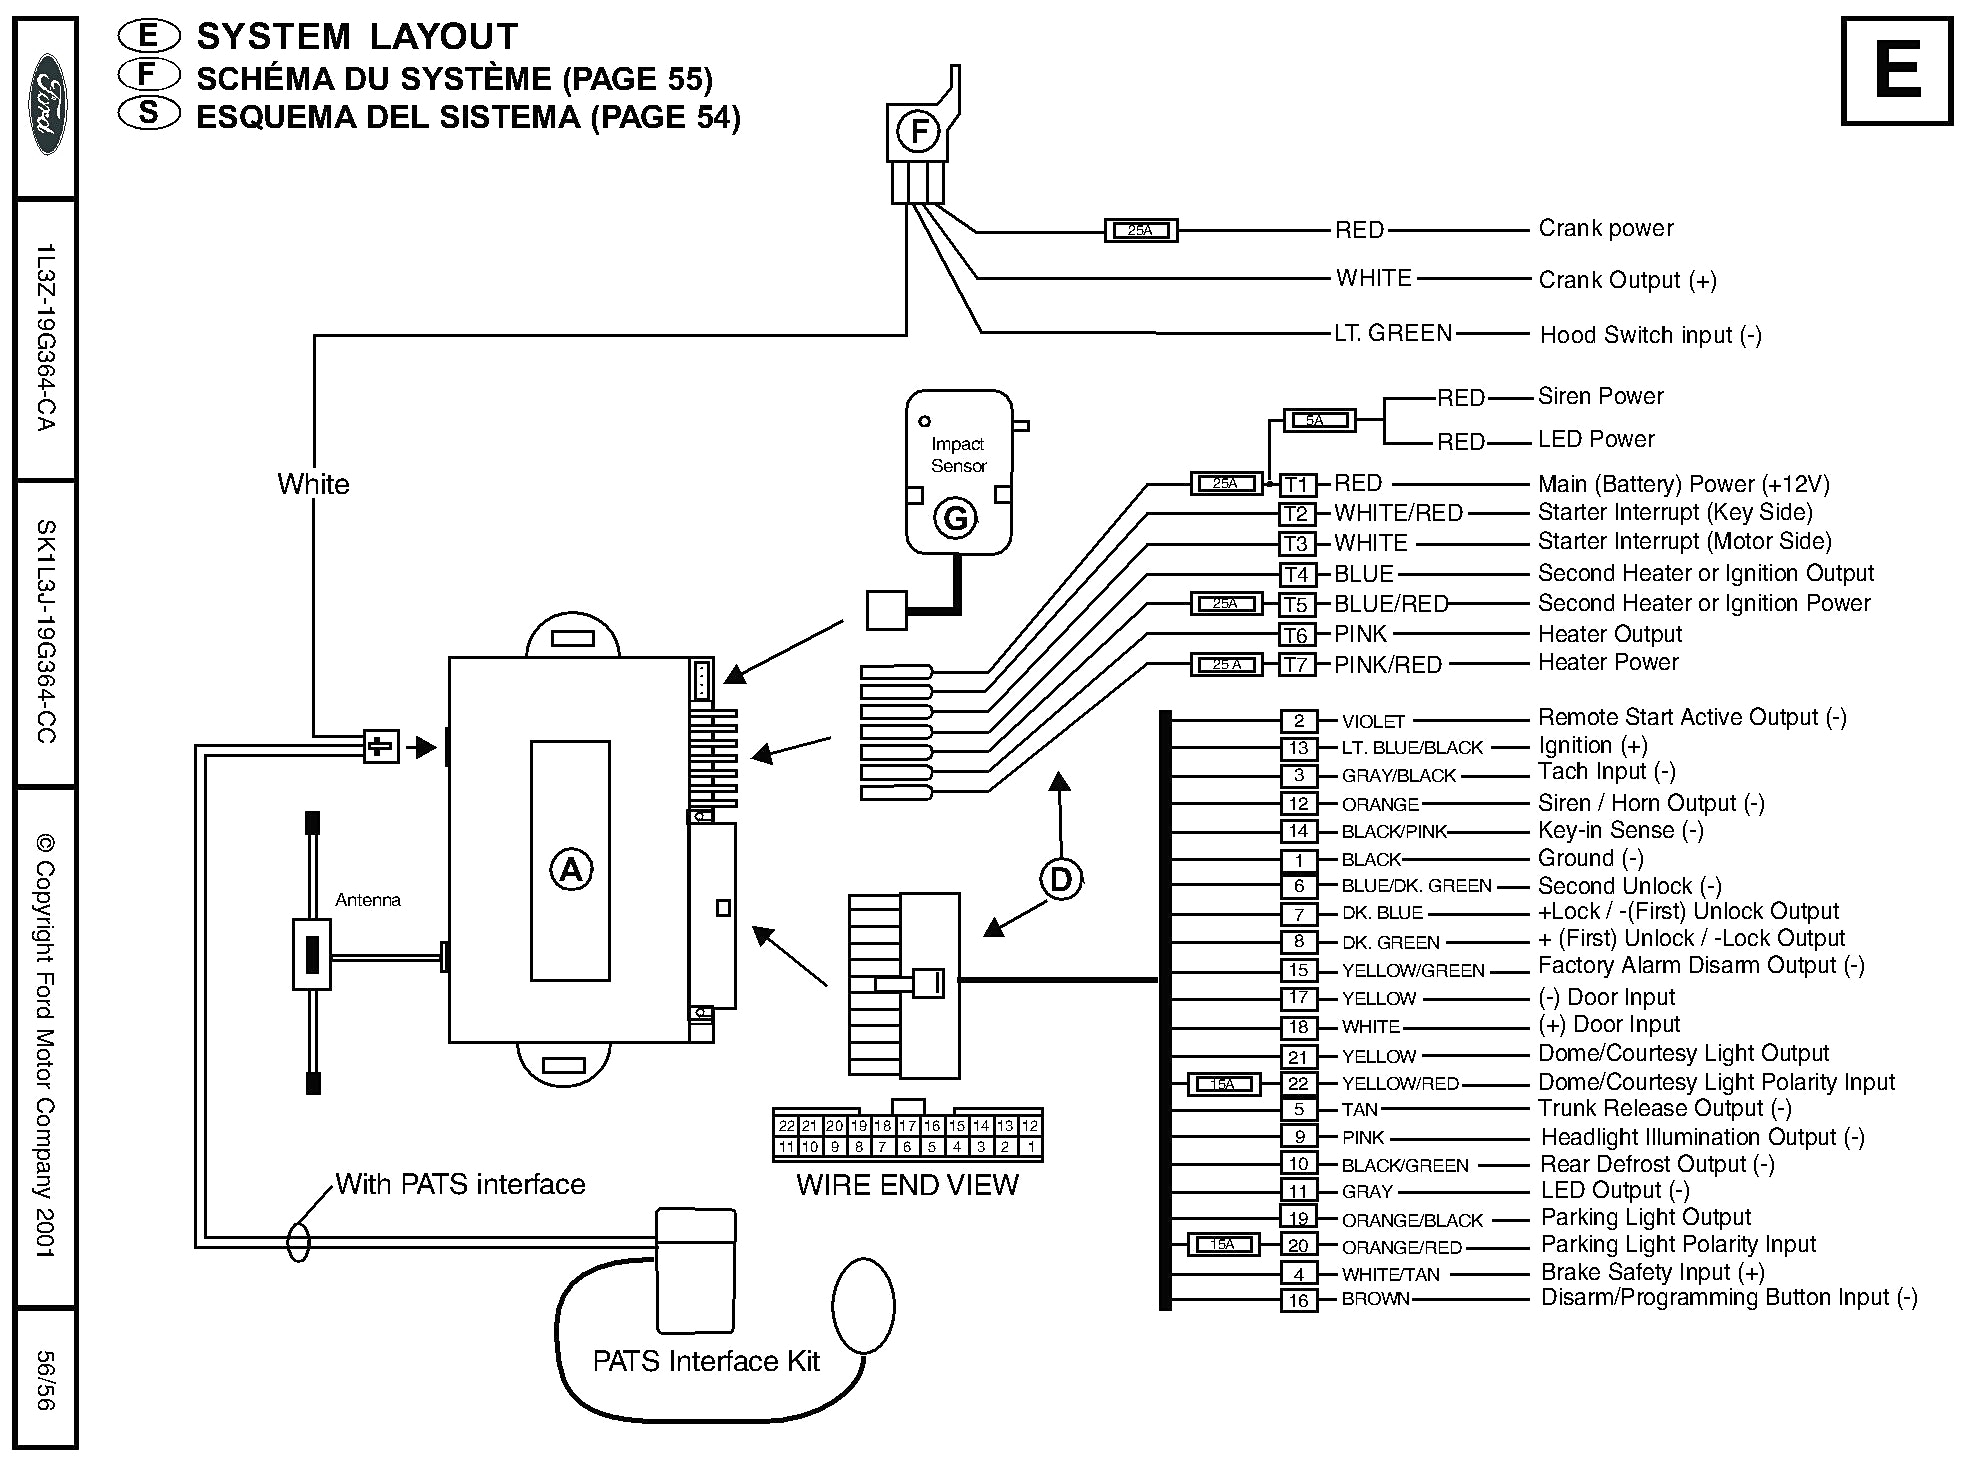 Ready Remote Wiring Diagram Ready Remote Wiring Diagram Today Diagram Database